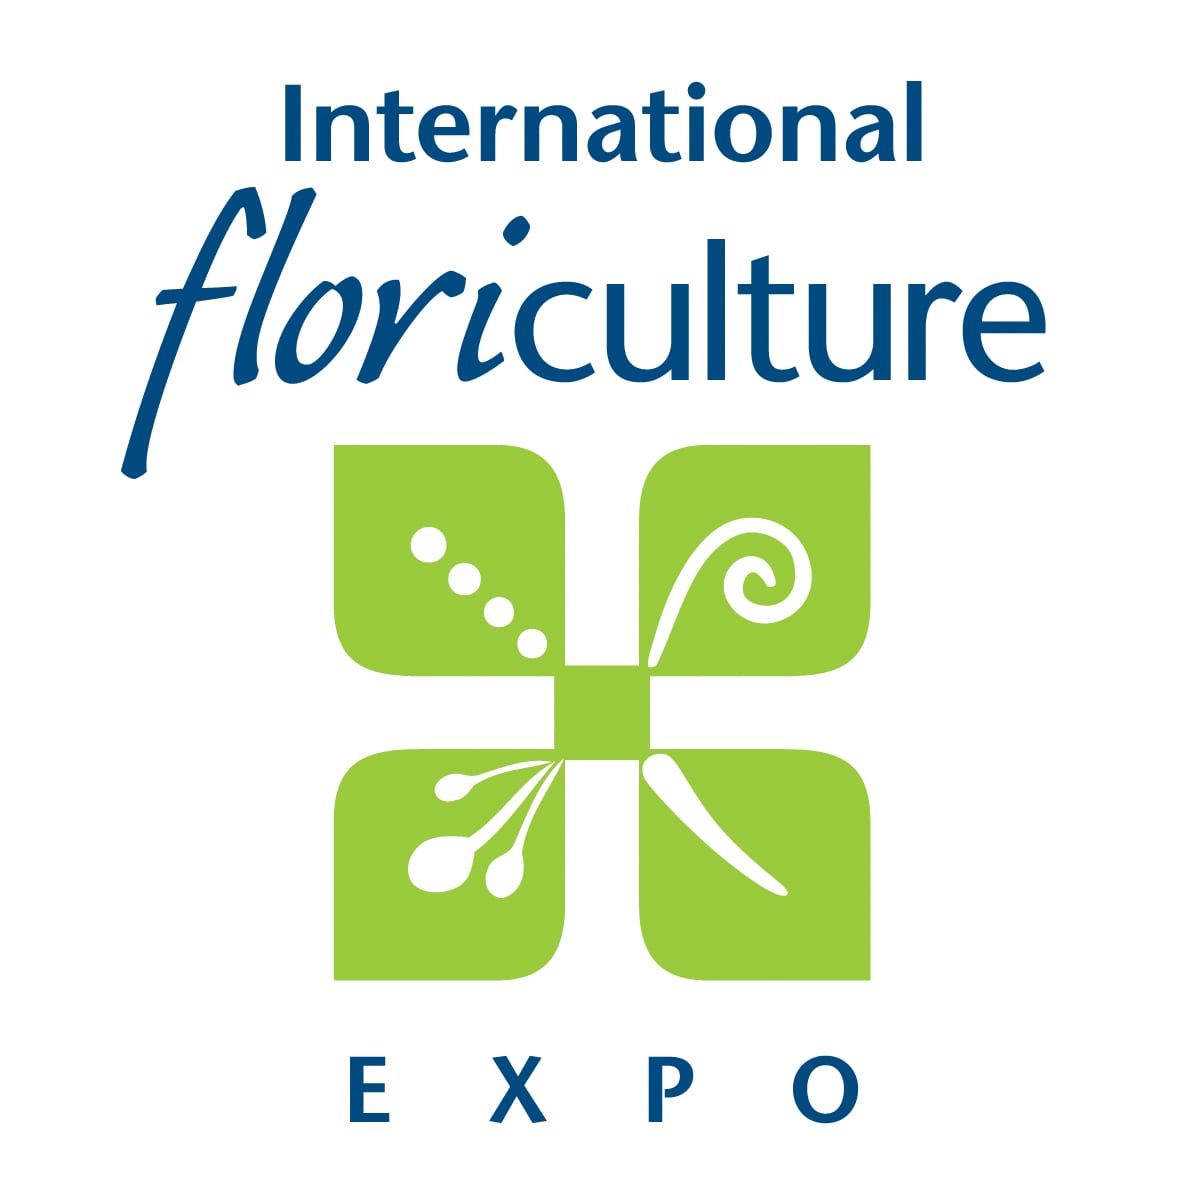 International Floriculture Expo Postponed to September 15-17, 2020 at the Miami Beach Convention Center